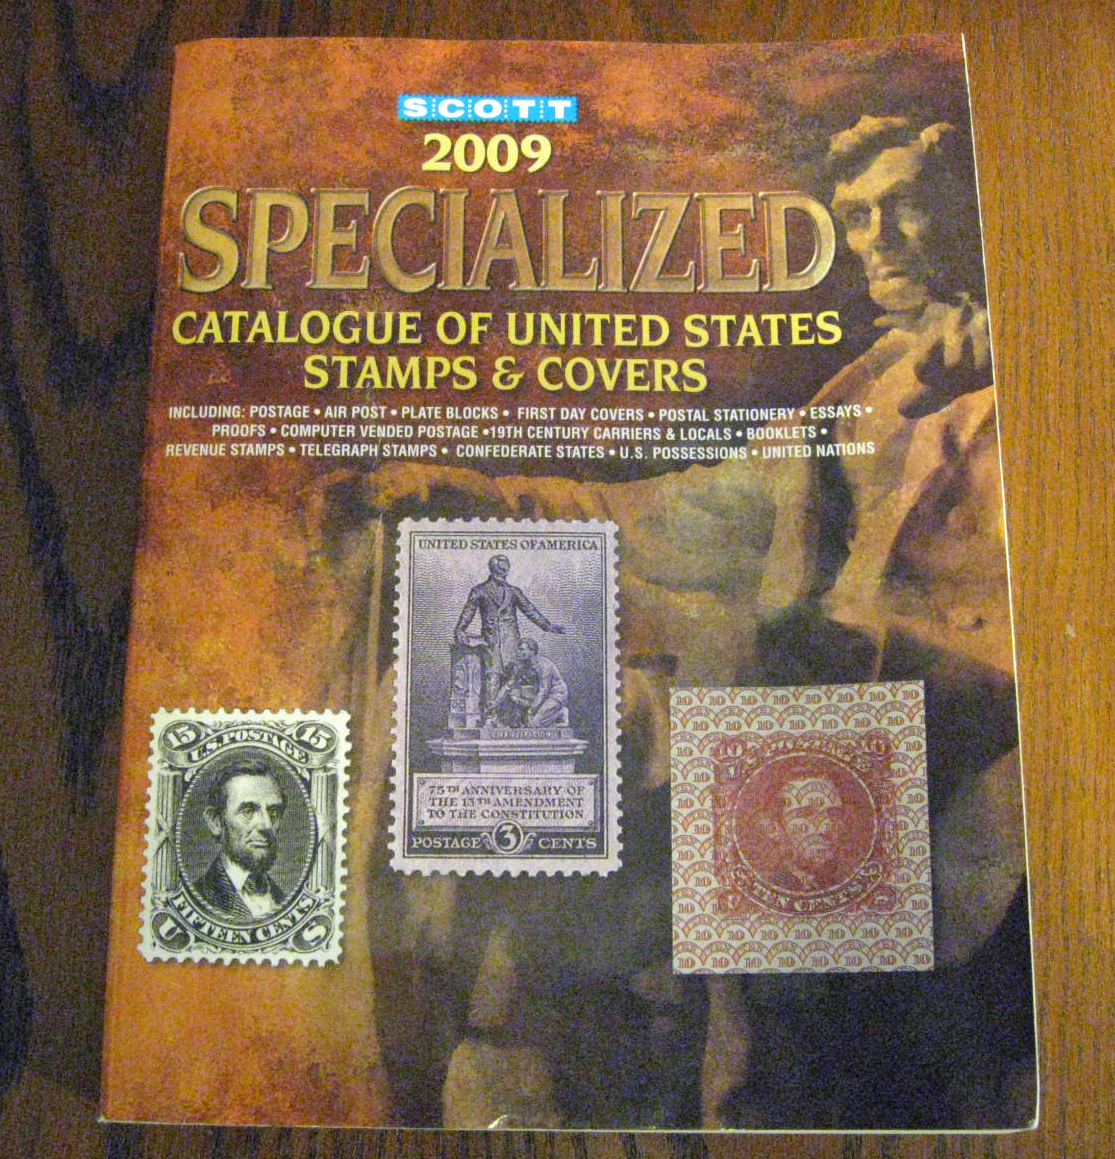 2009 Scott Specialized Catalogue of US Stamps & Covers